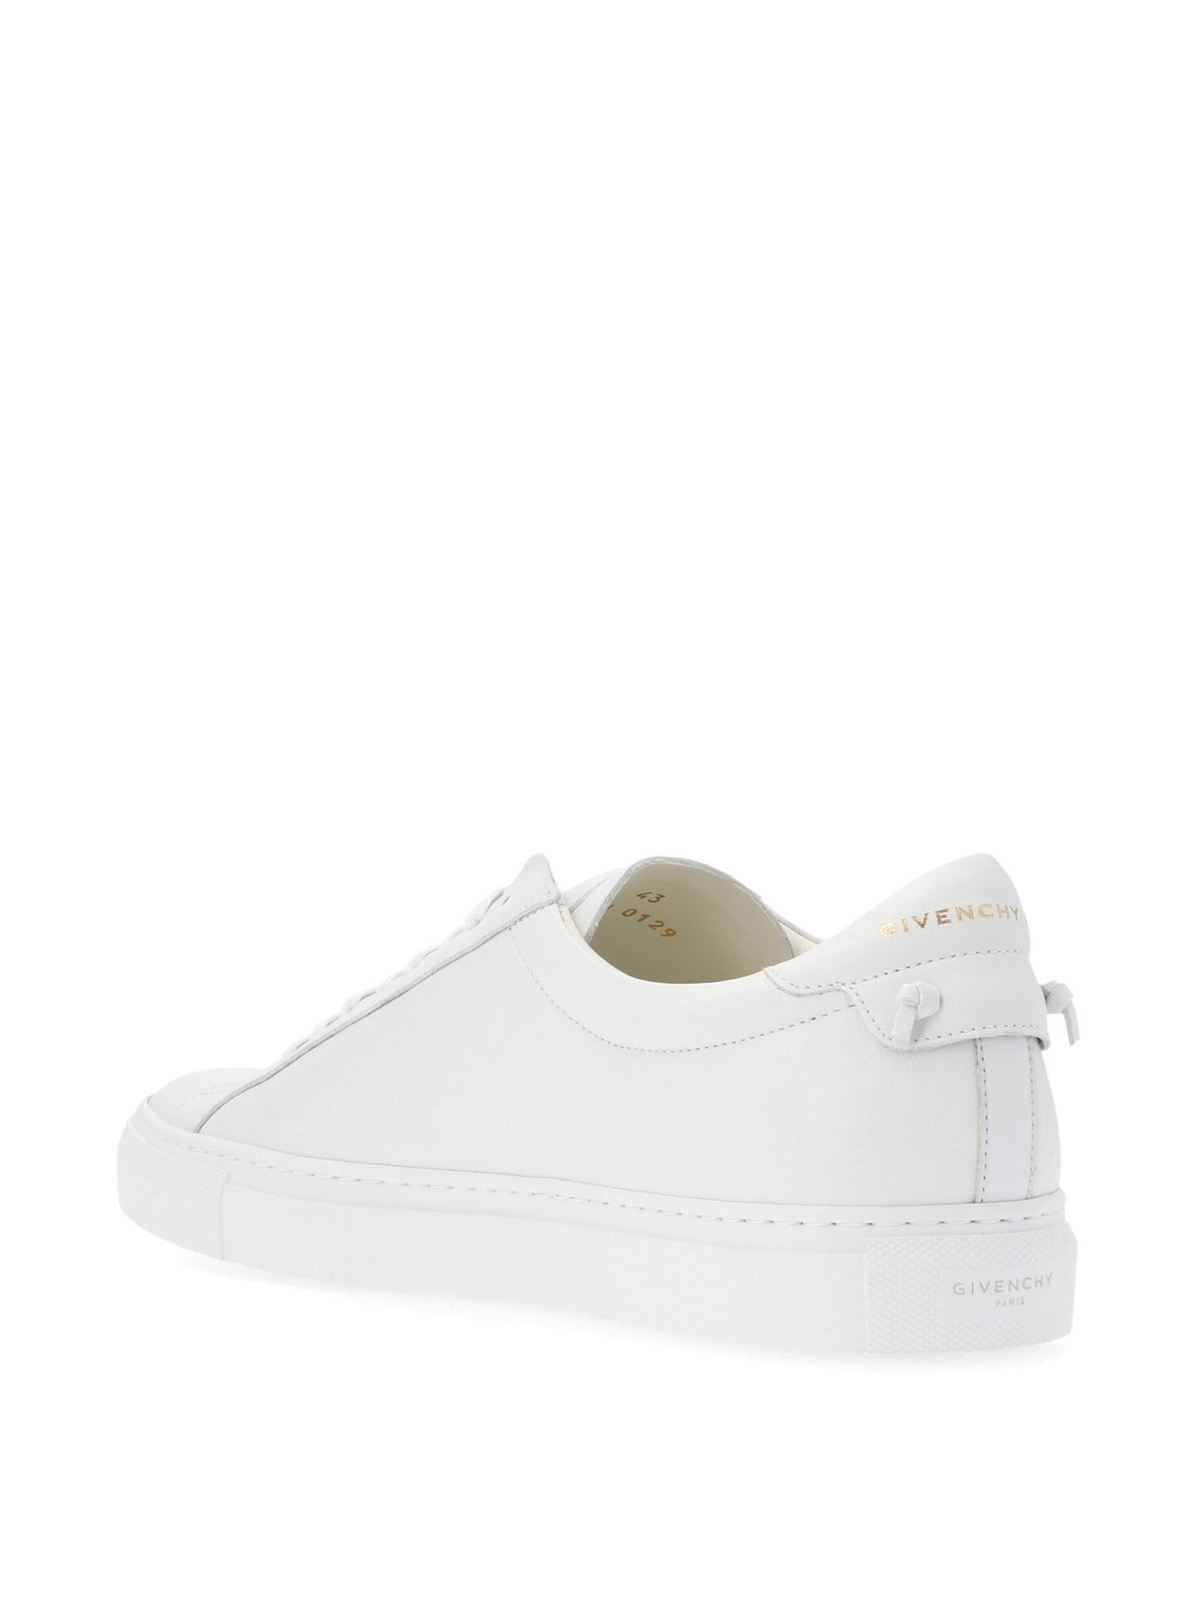 Givenchy - Urban street sneakers in 